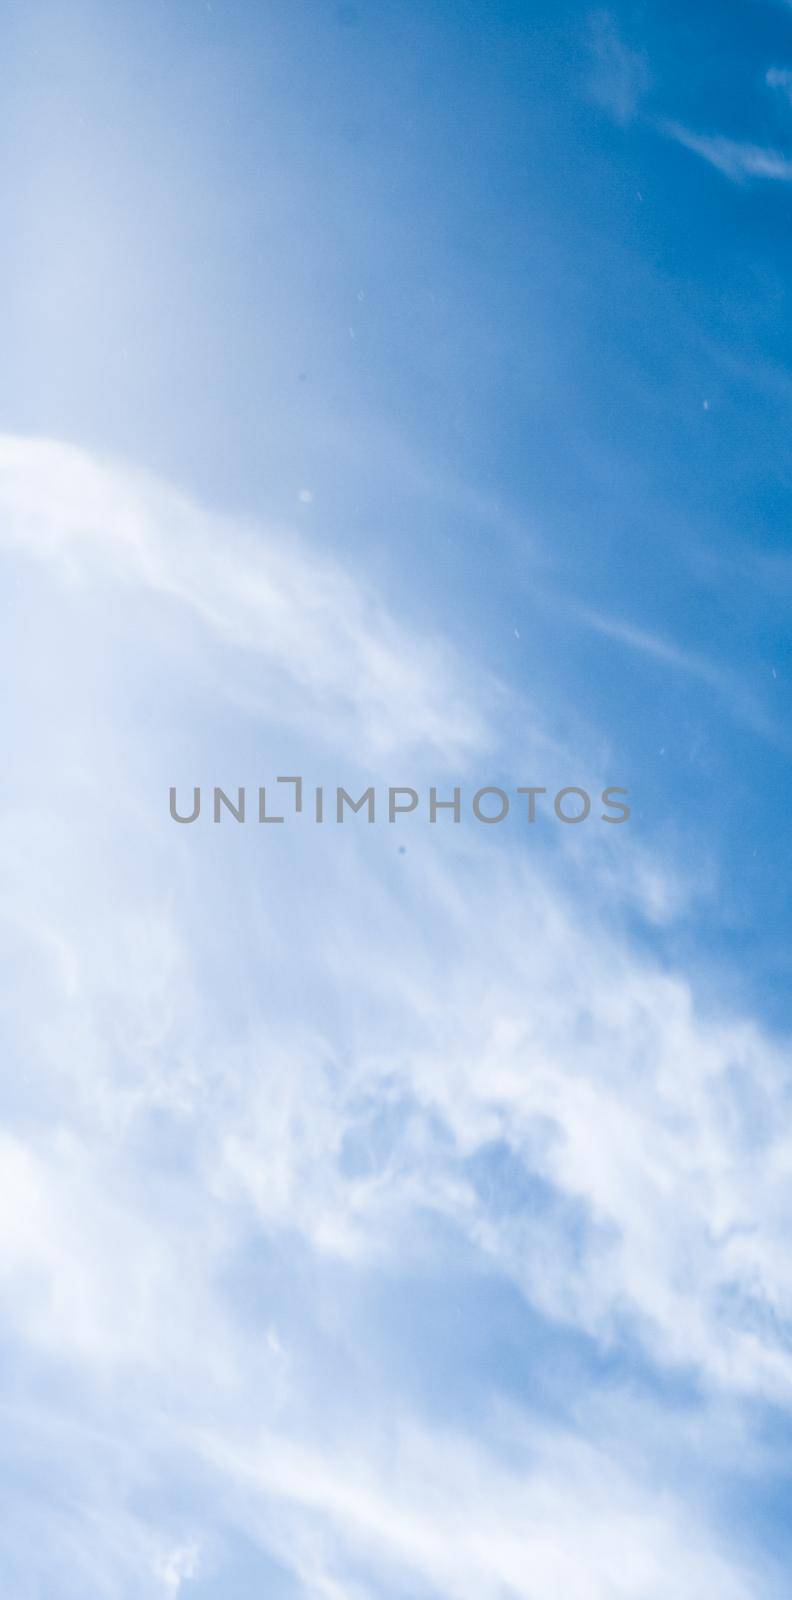 Nature backdrop, solar energy and spiritual concept - Blue sky background, white clouds and bright sunlight